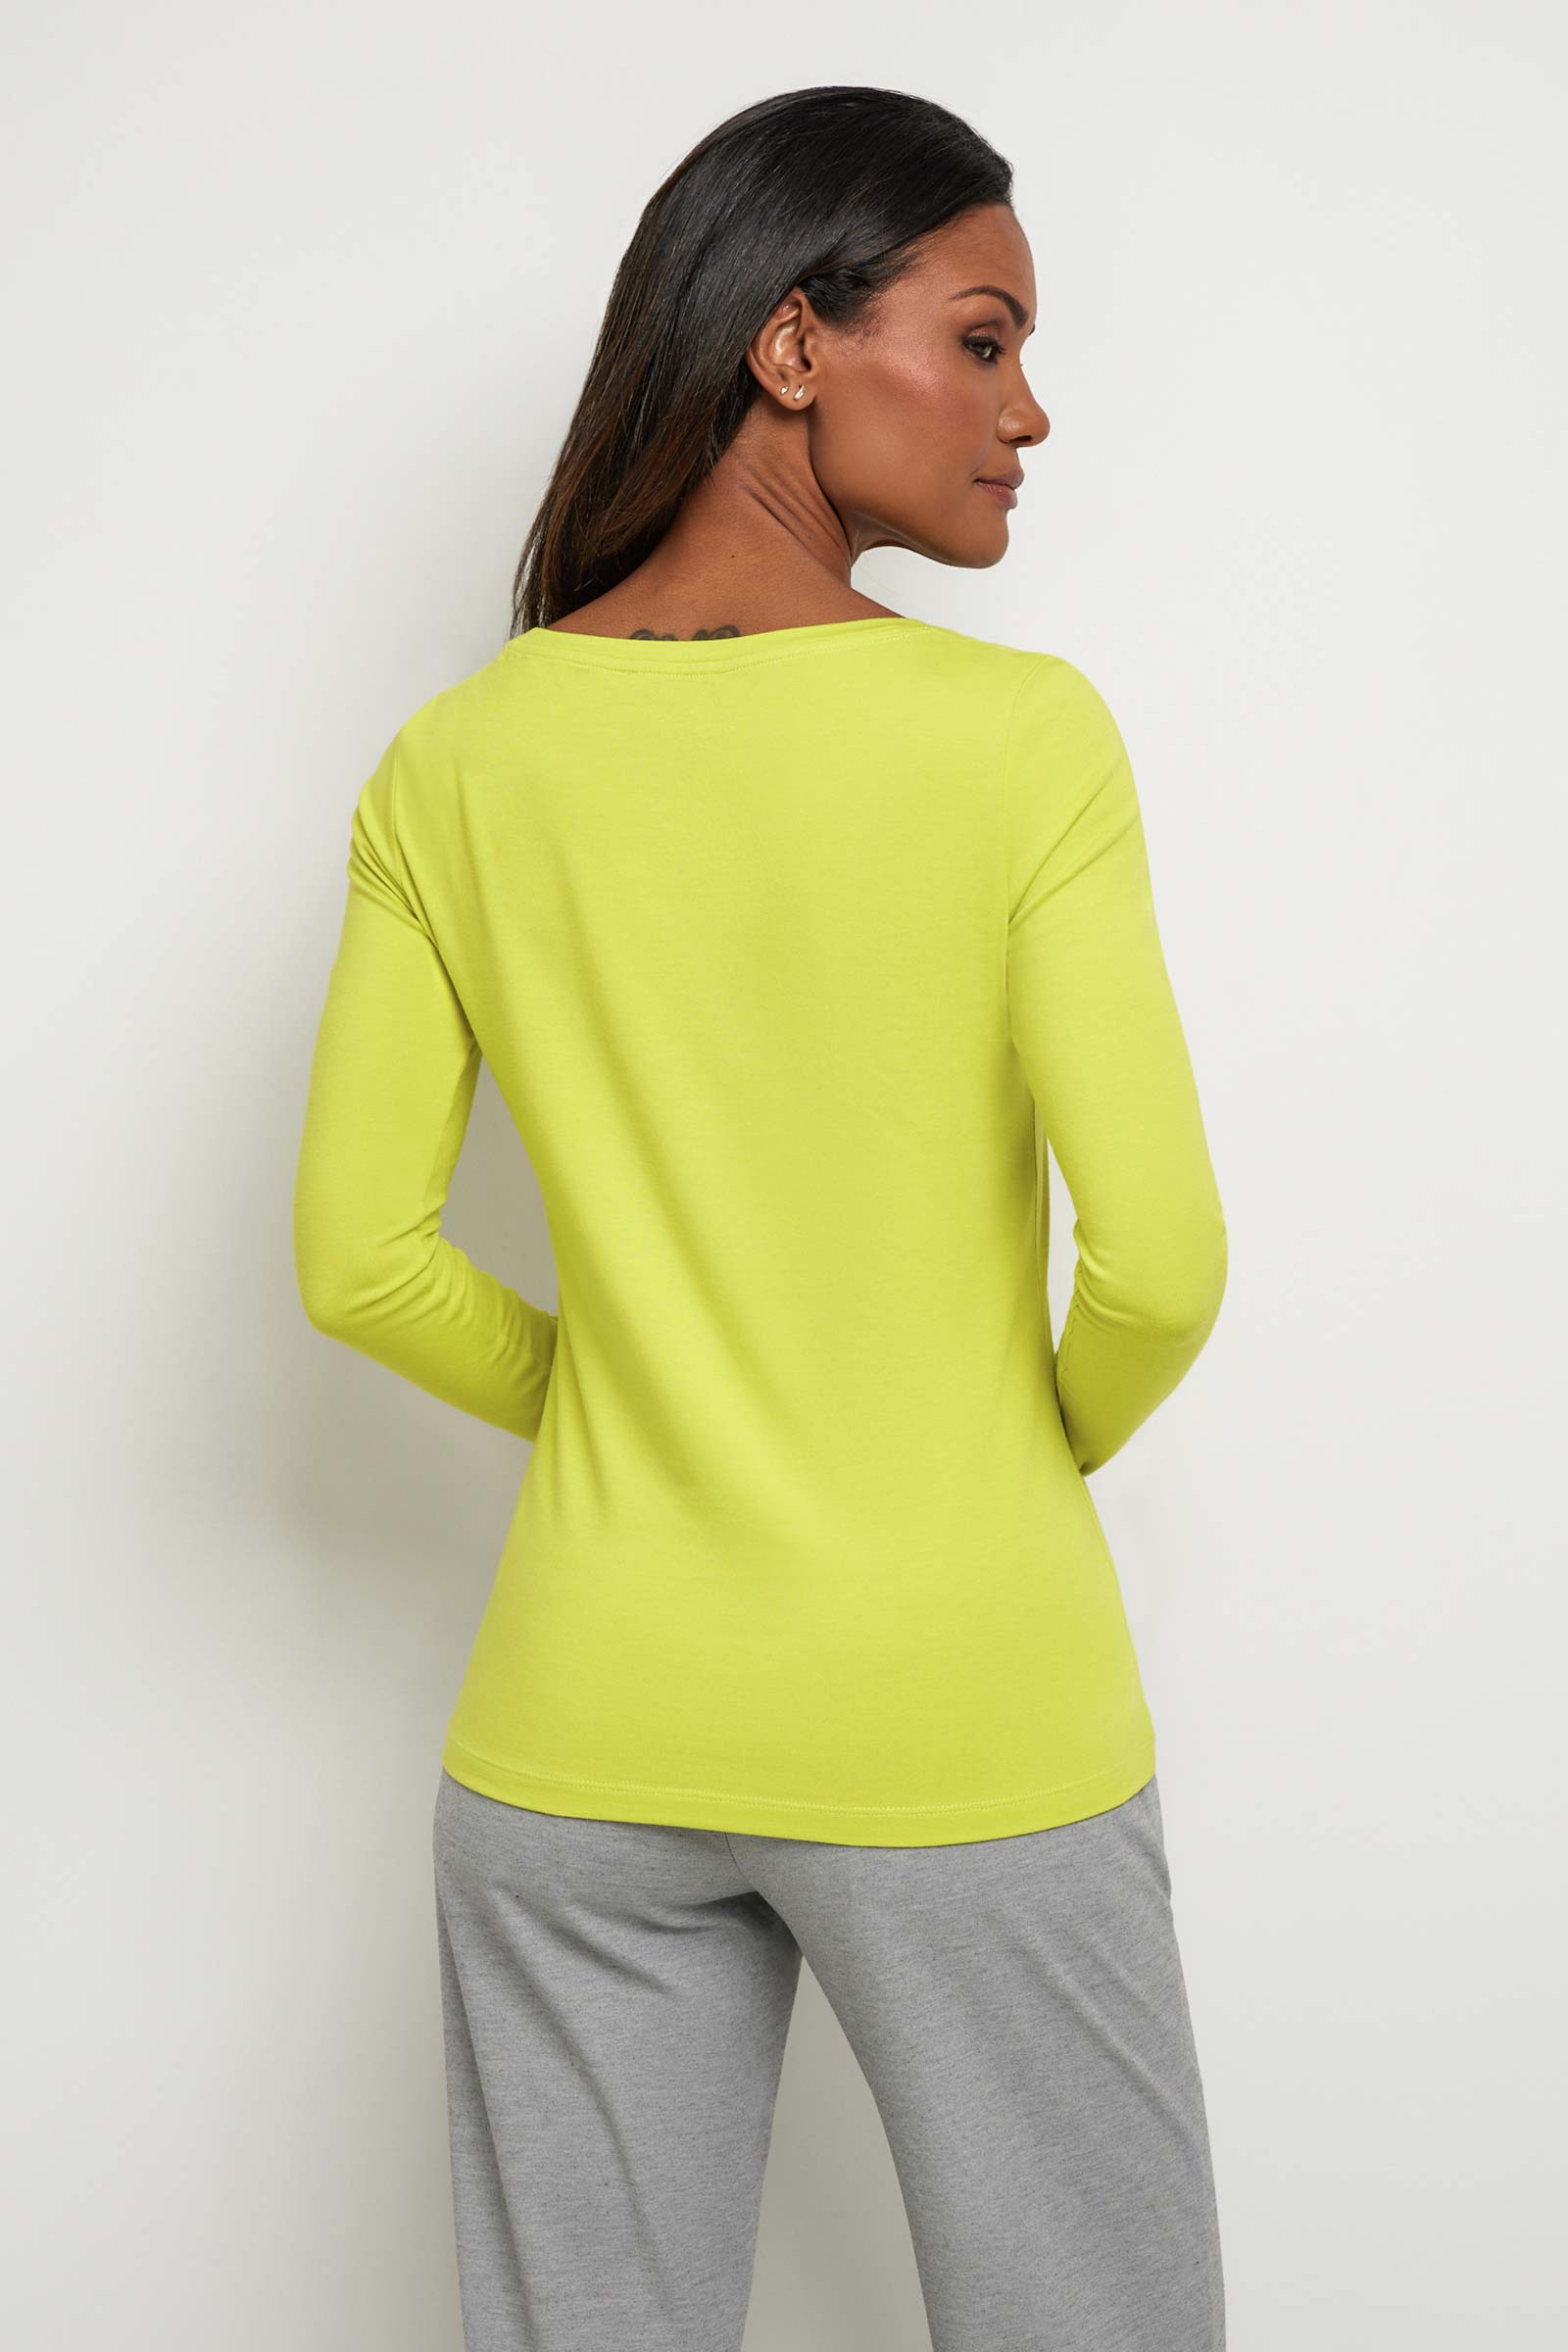 The Best Travel Top. Woman Showing the Back Profile of a Juliana Top in Citrus Yellow.